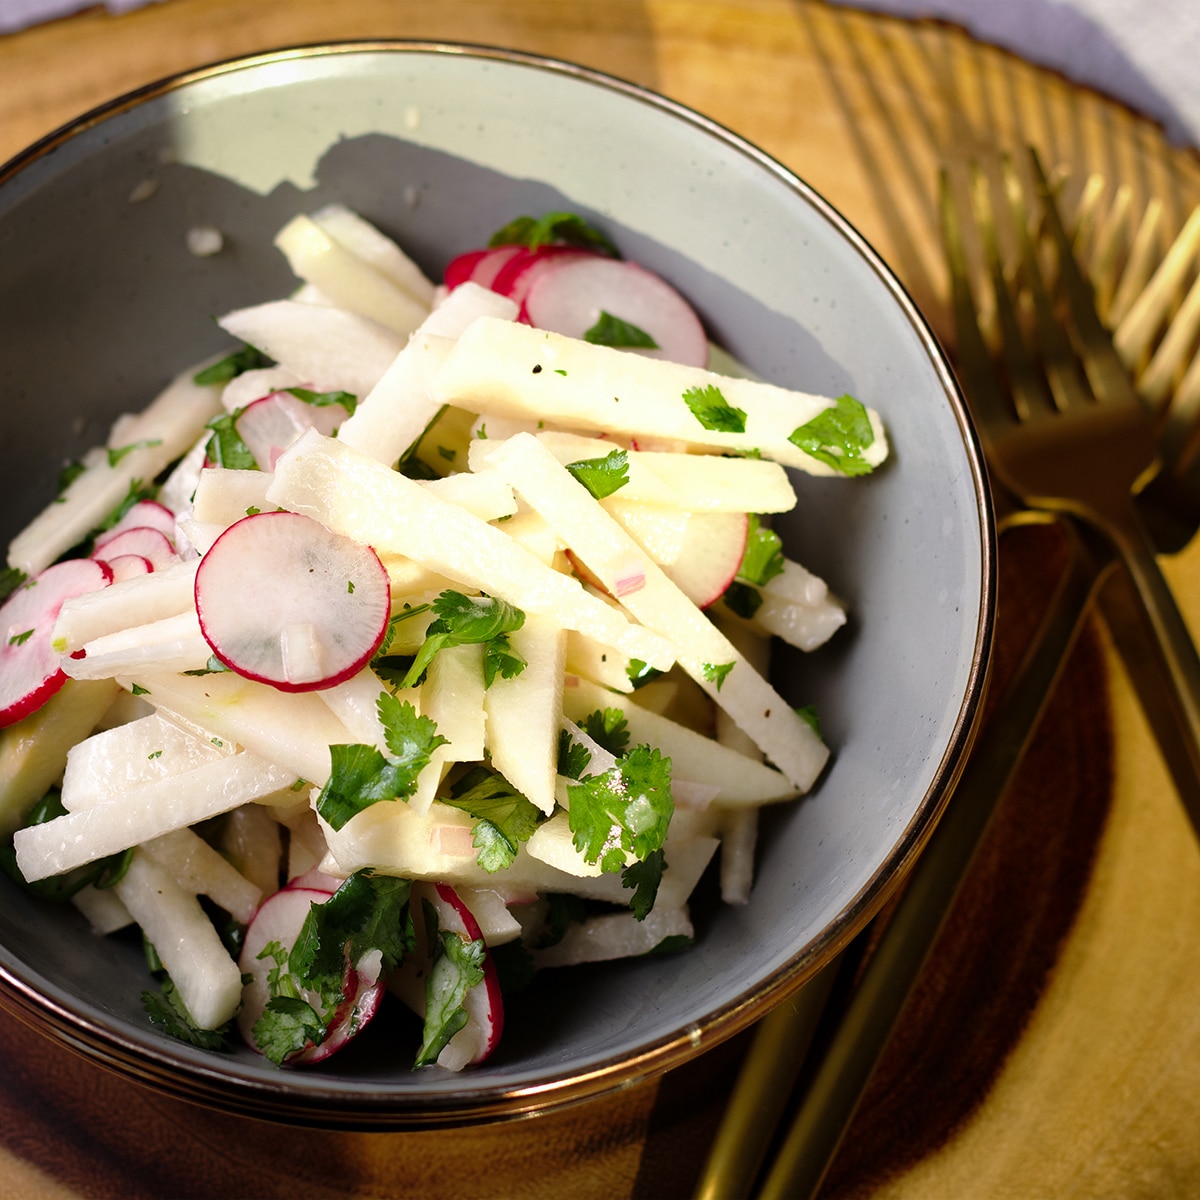 A bowl on a wood serving platter filled with jicama salad with apples.